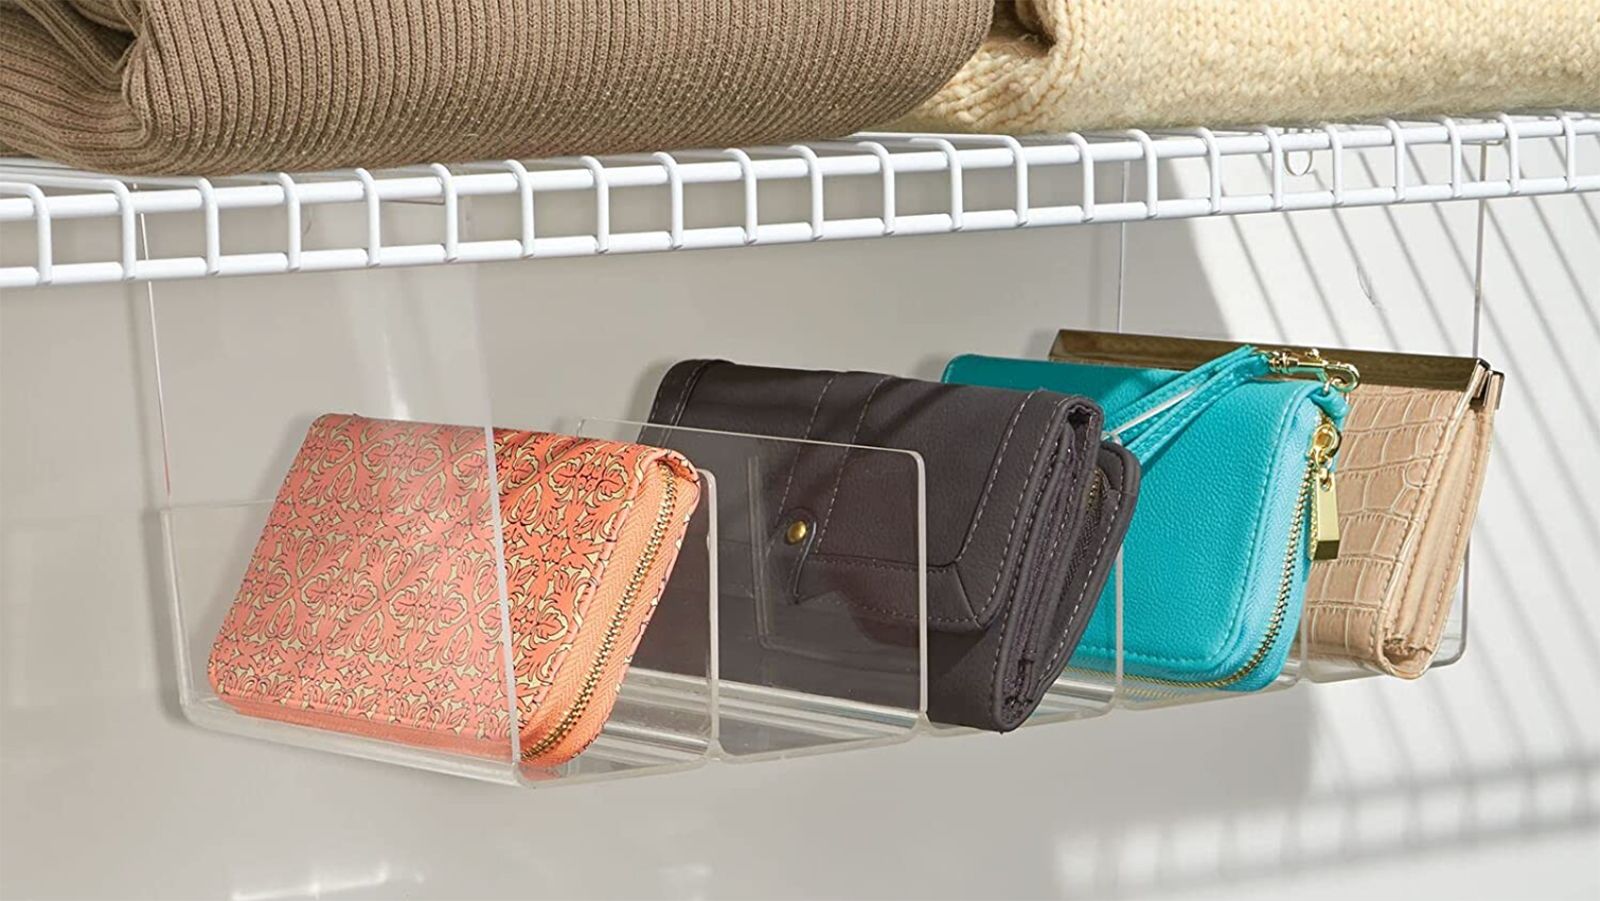 From there beads dash 20 products to organize your luggage under $25 | CNN Underscored